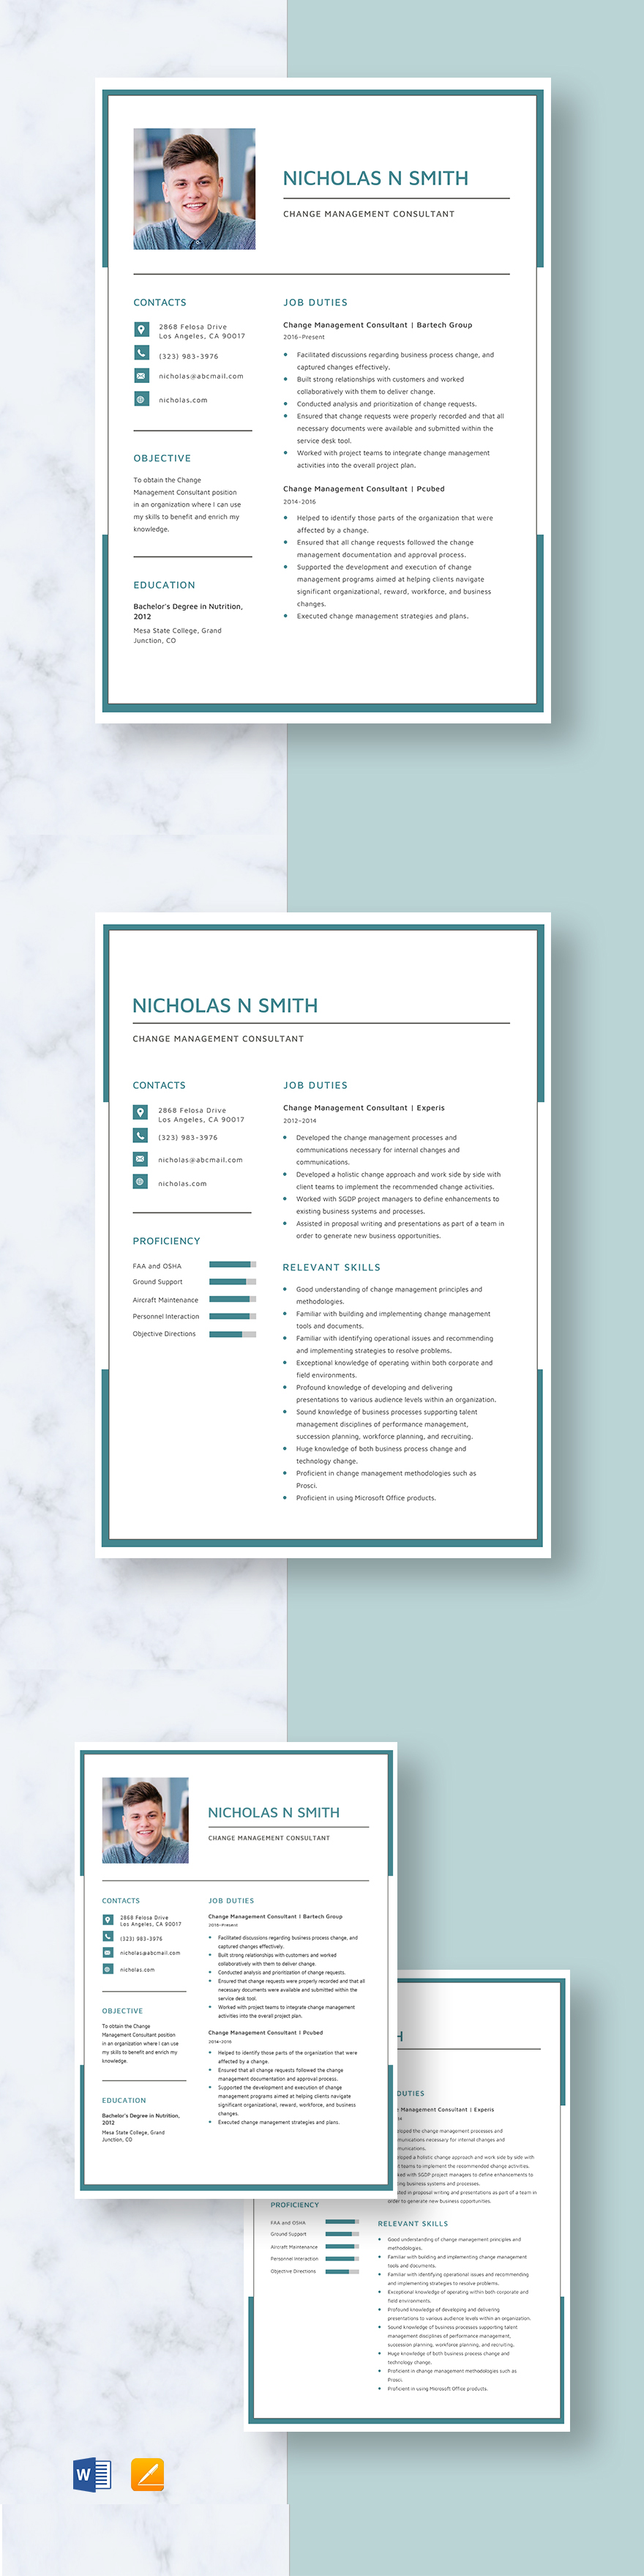 change-management-consultant-resume-template-word-apple-pages